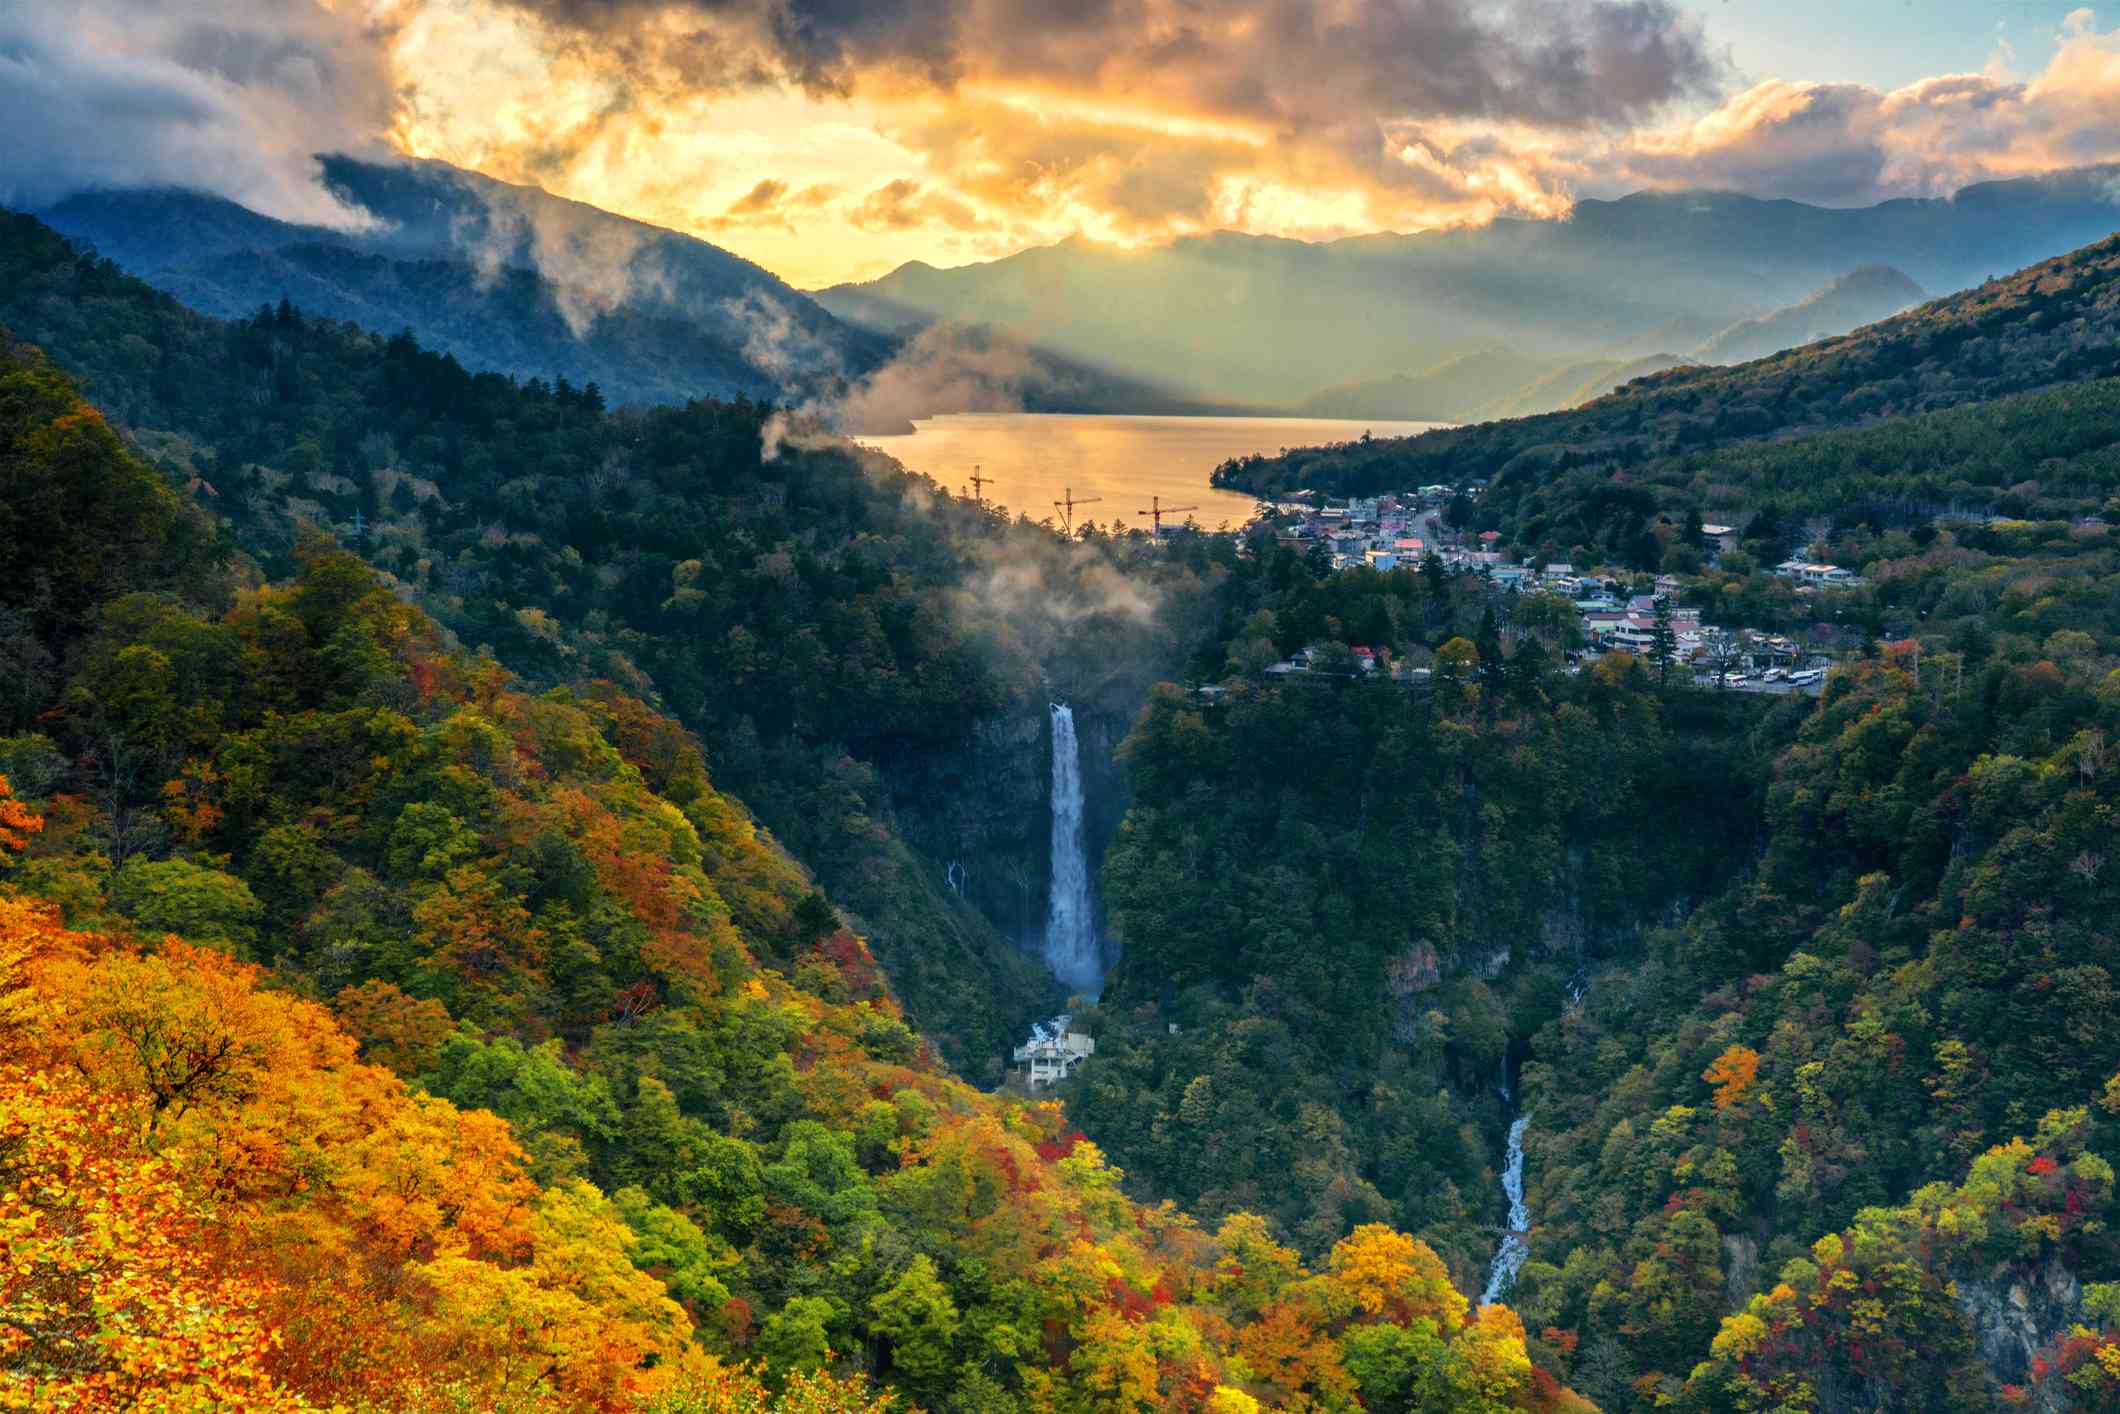 Nikko National Park: The Complete Guide